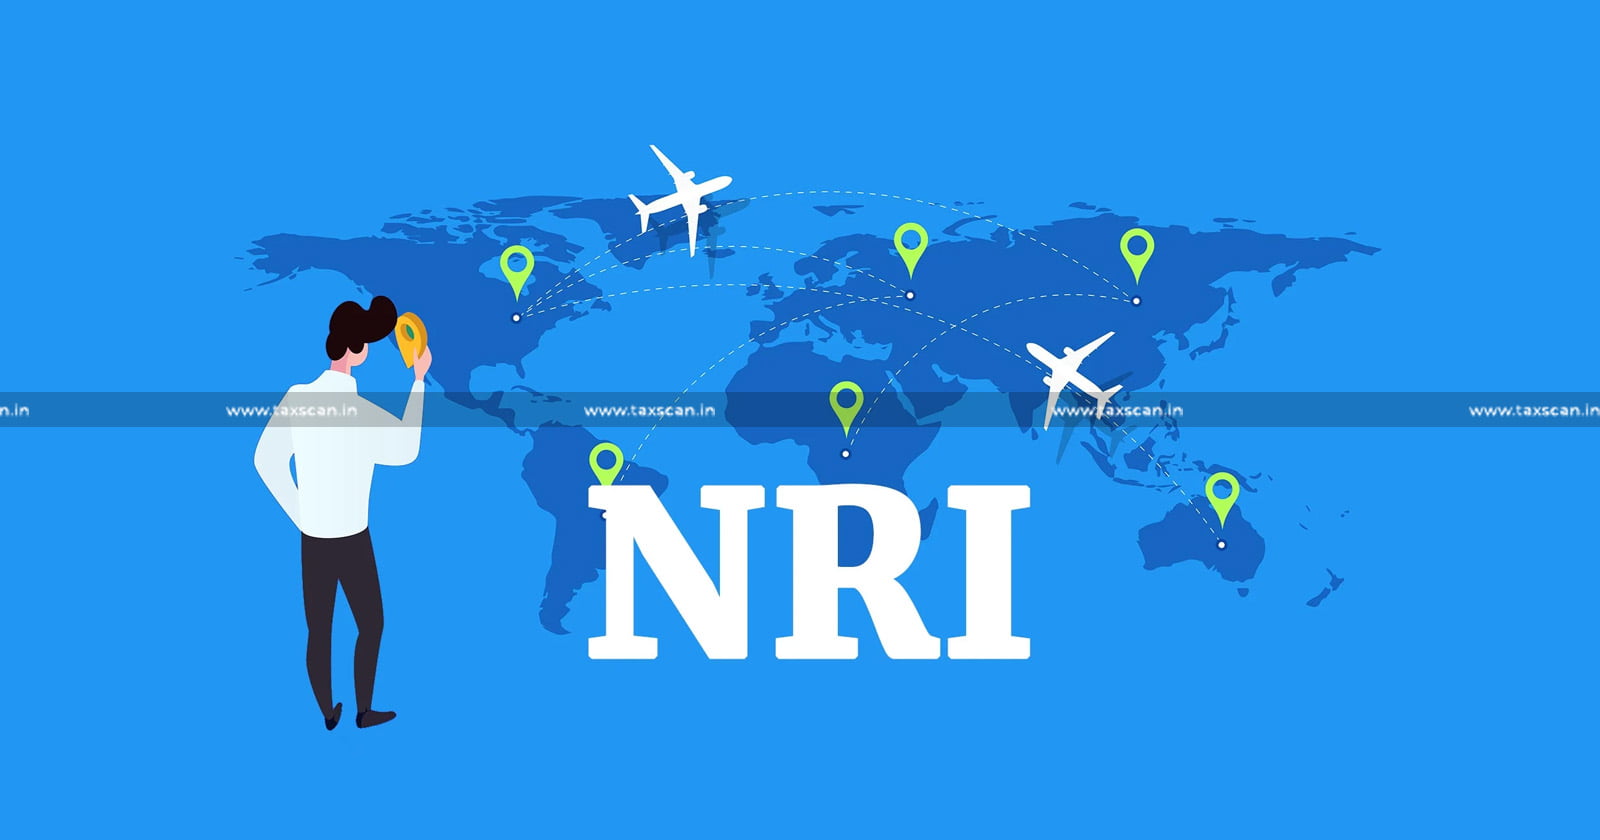 Citizenship and Taxability of NRI cannot be determined by TDS Deduction - Citizenship and Taxability of NRI - NRI - TDS Deduction by Overseas Companies in India - TDS Deduction - TDS - ITAT - Taxscan